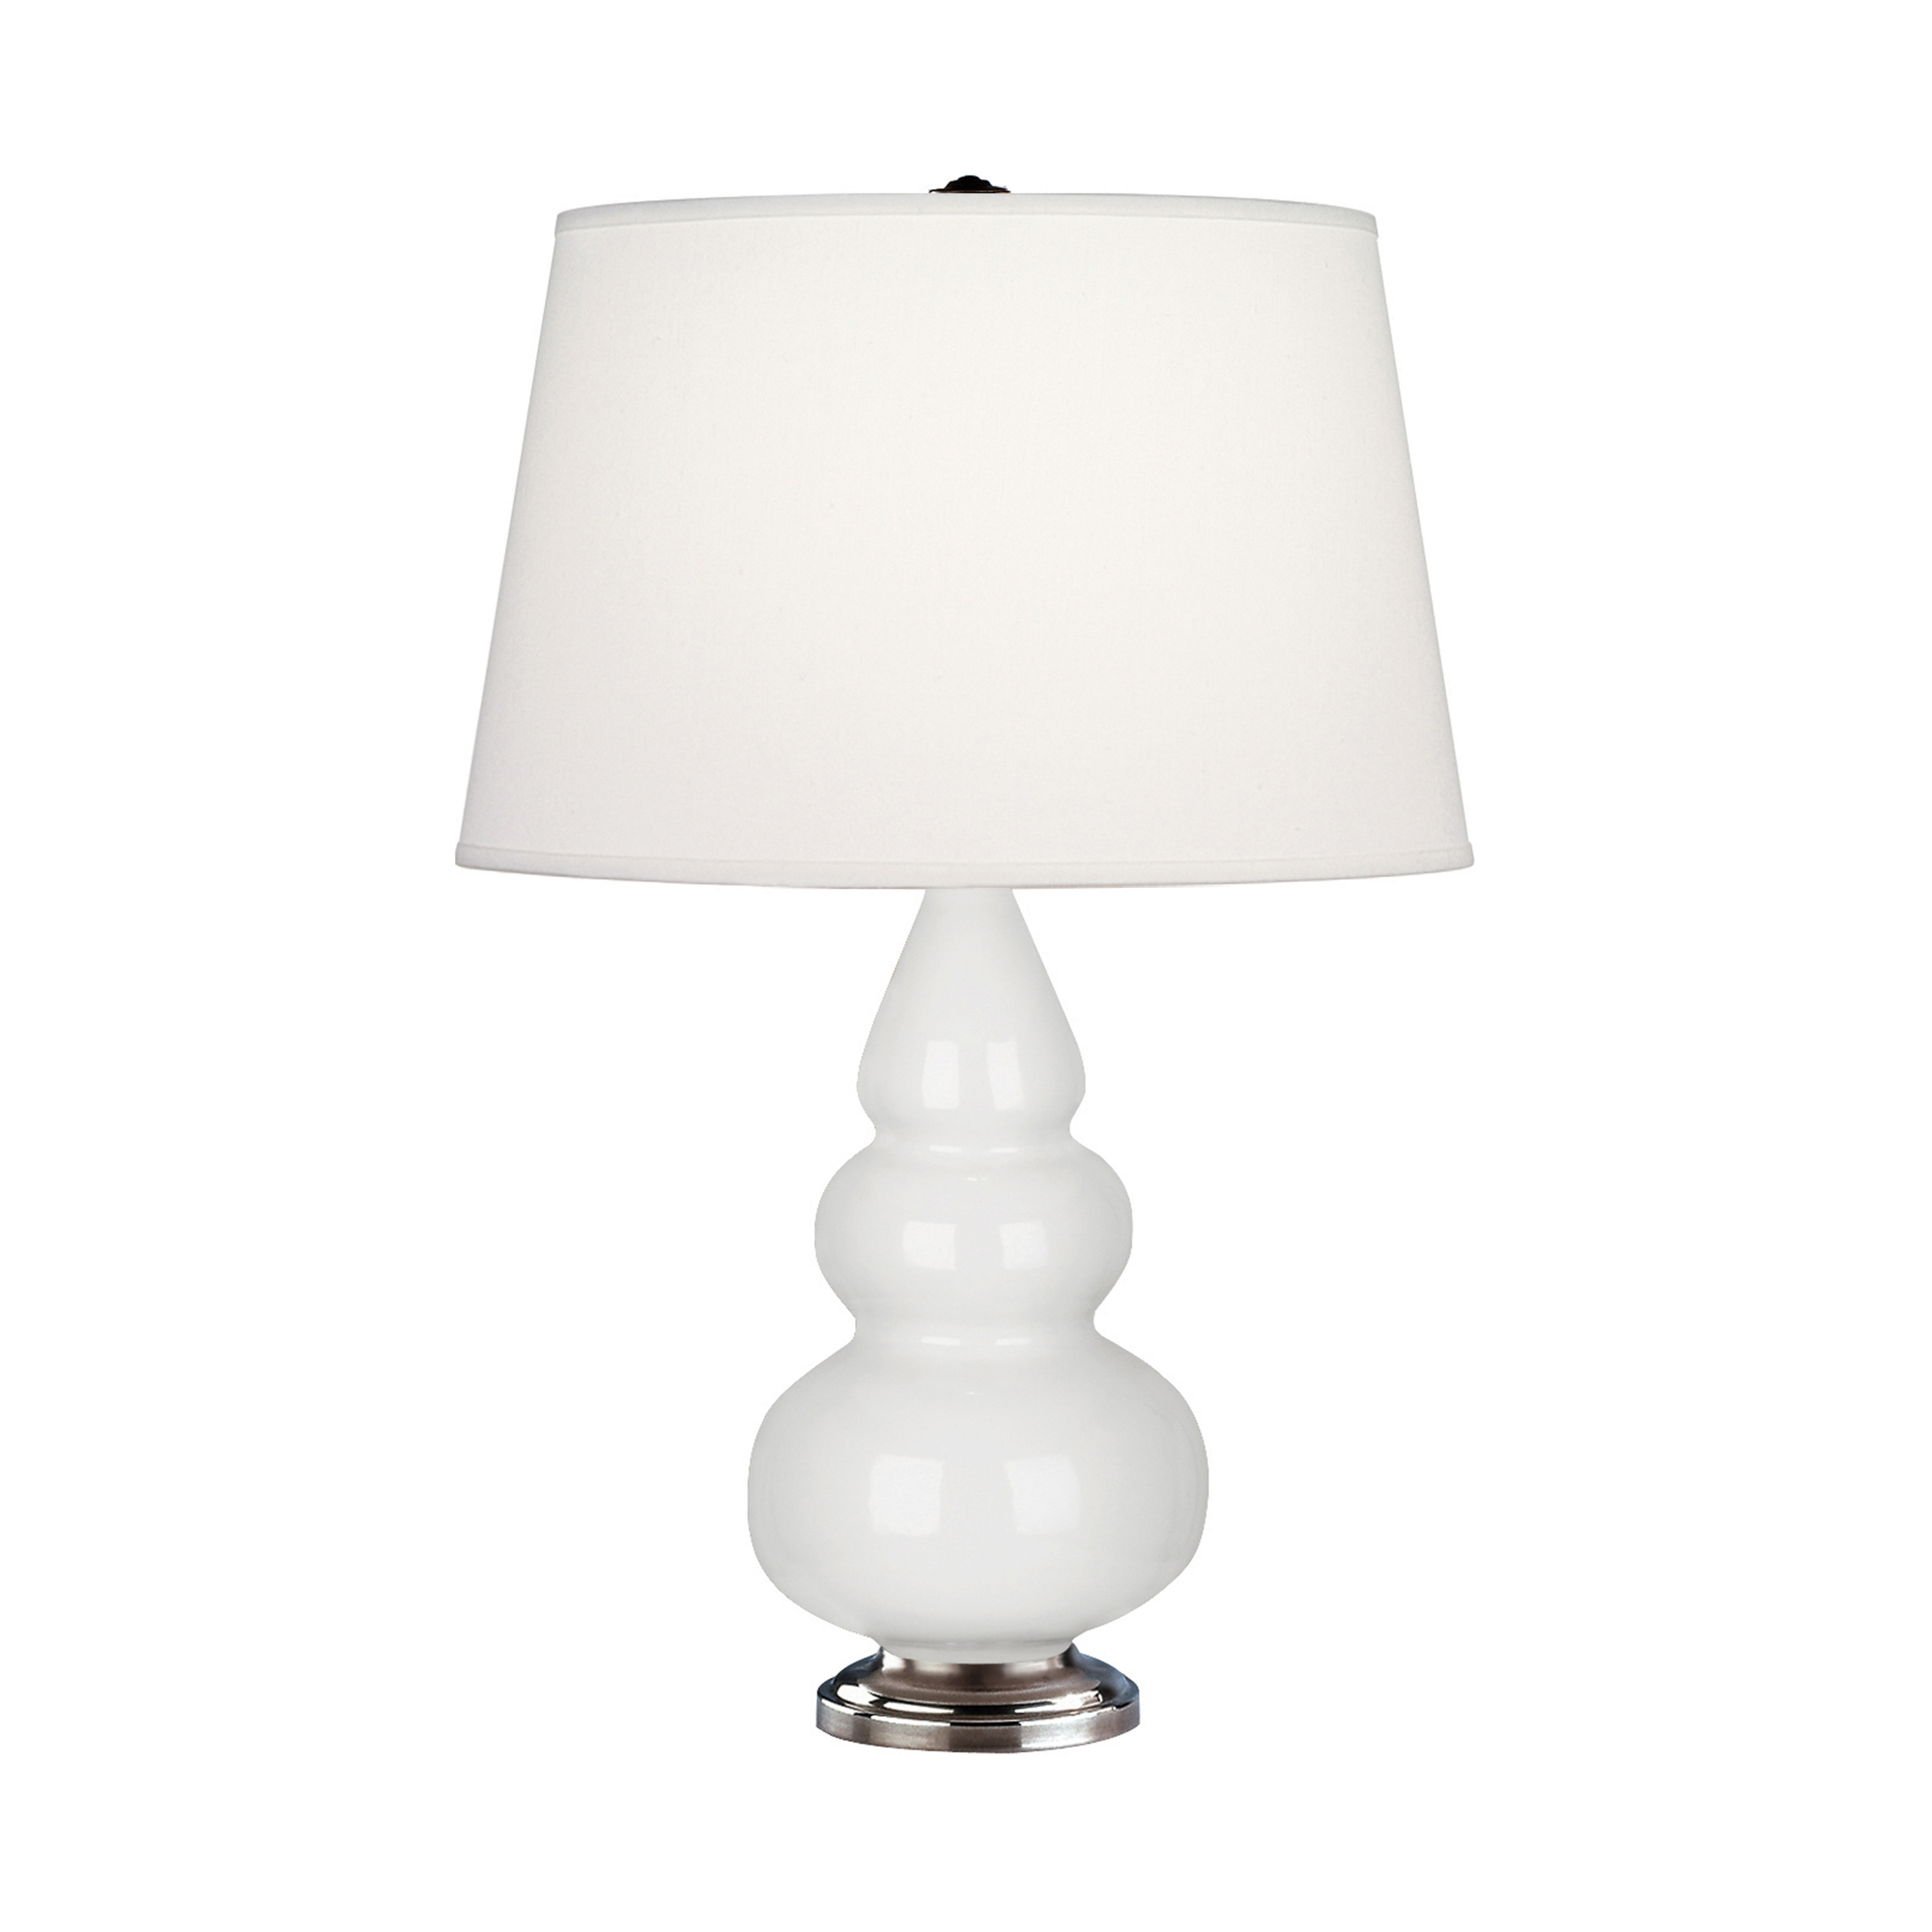 Small Triple Gourd Accent Lamp Style #281X